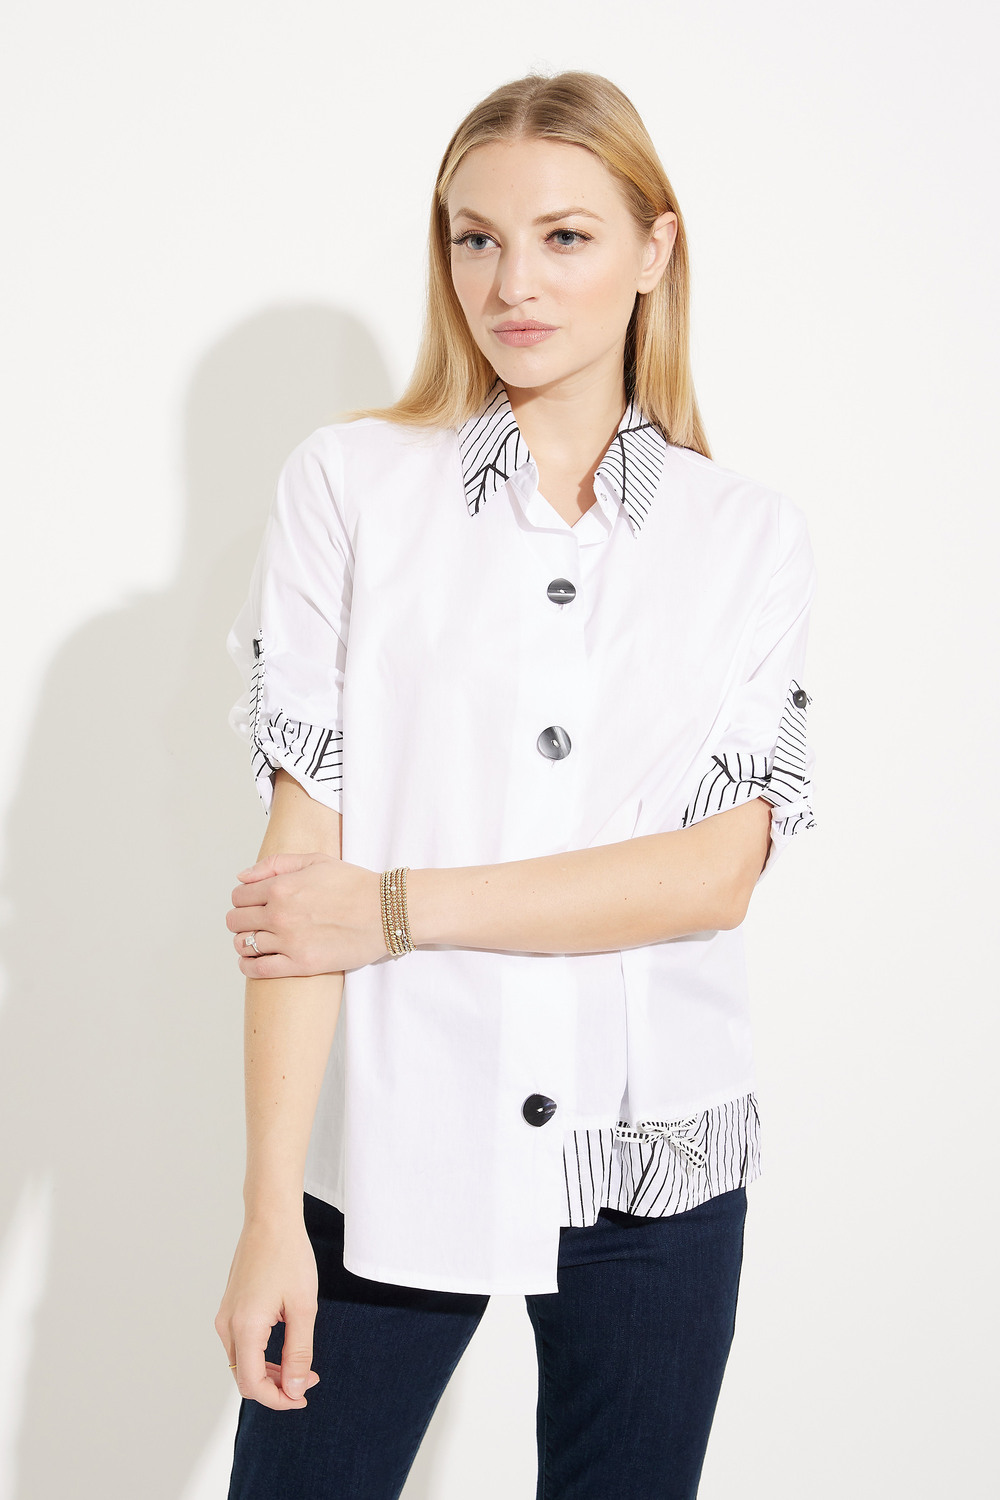 Contrast Trim Button-Down Blouse Style EW30138. As Sample